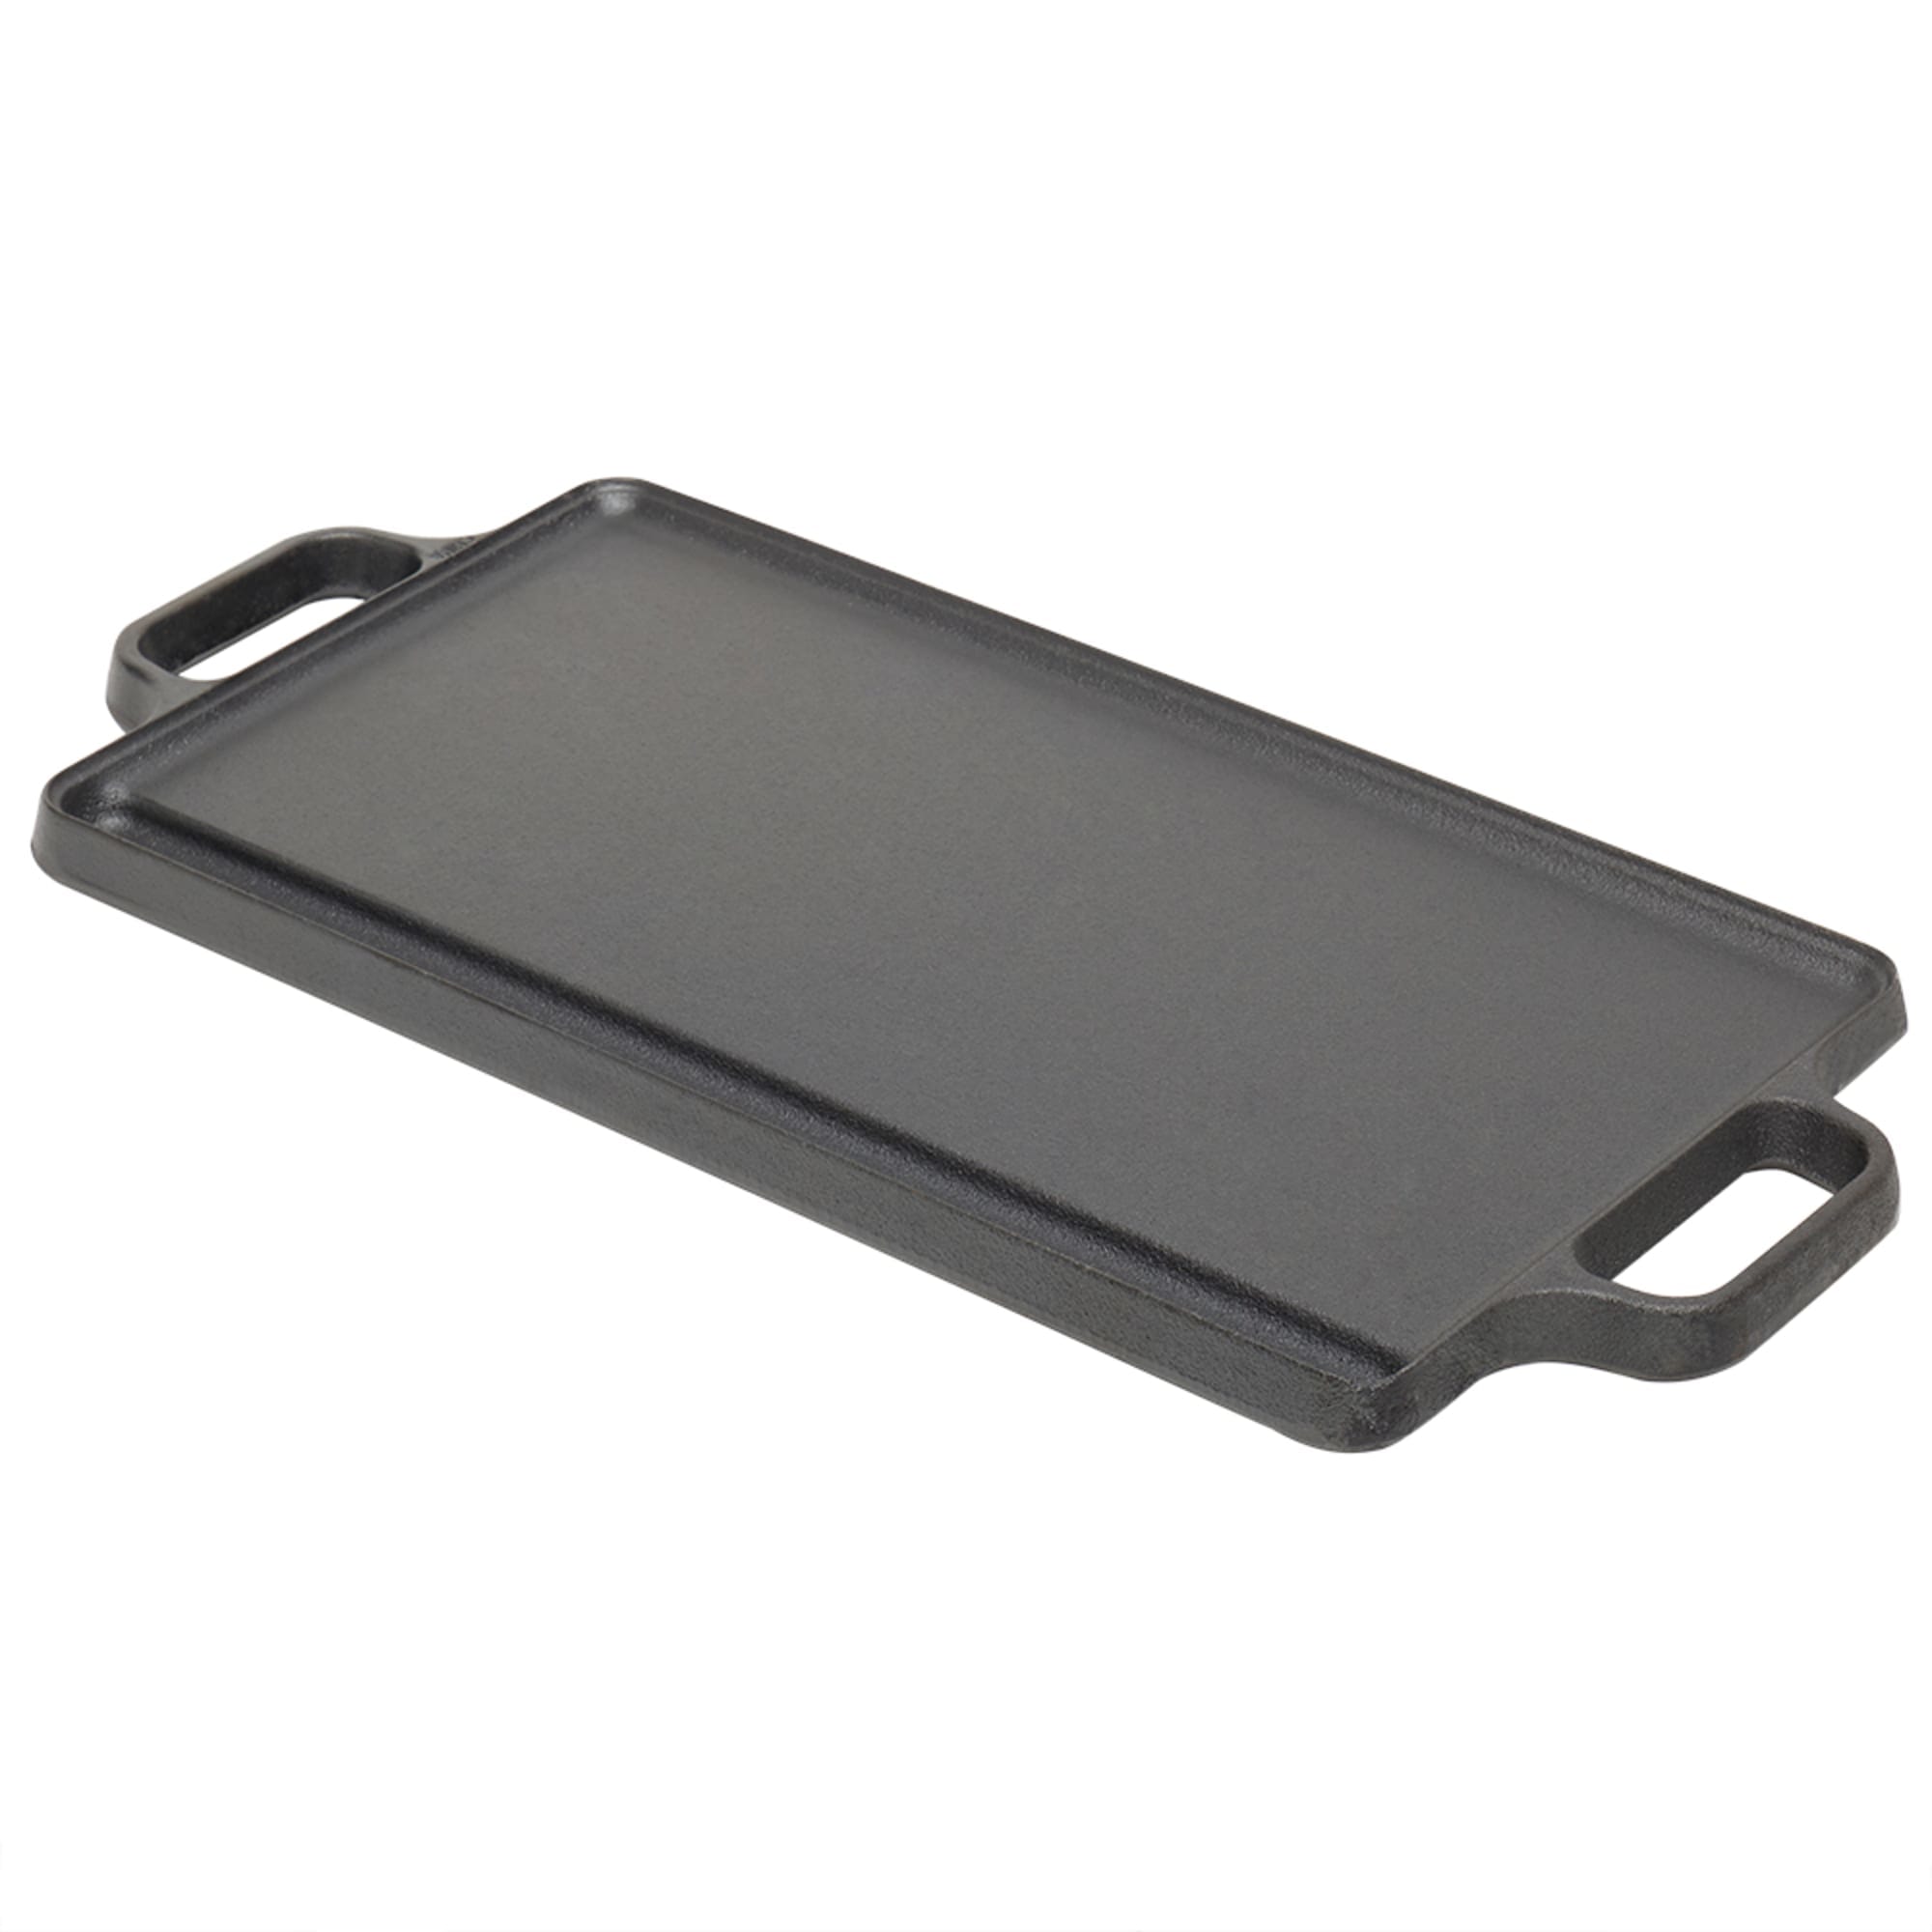 Home Basics 19-inch Pre-Seasoned Cast Iron Griddle $20.00 EACH, CASE PACK OF 2